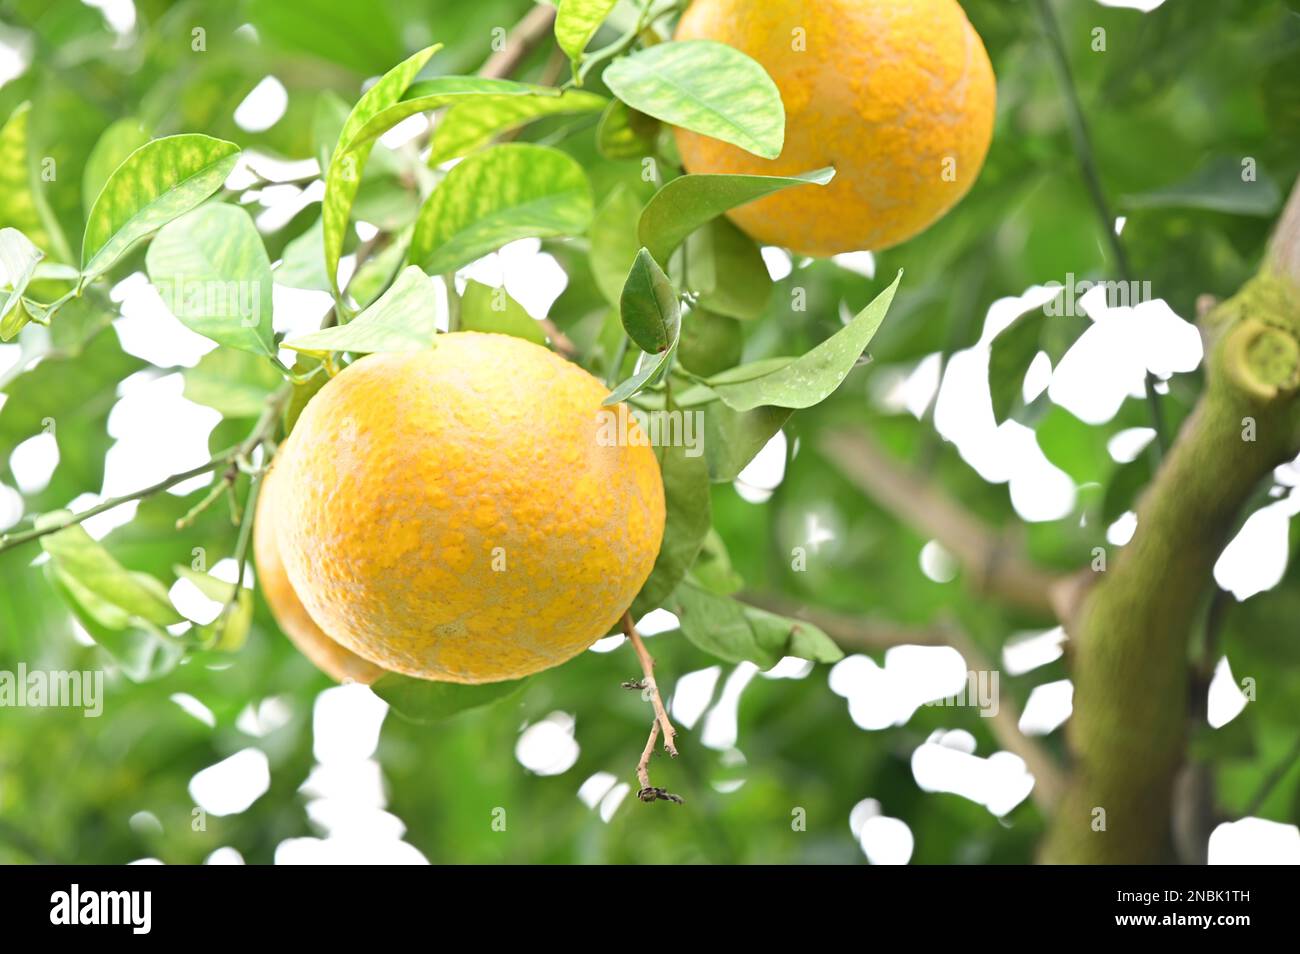 There is a big orange growing on the branch that looks delicious Stock Photo